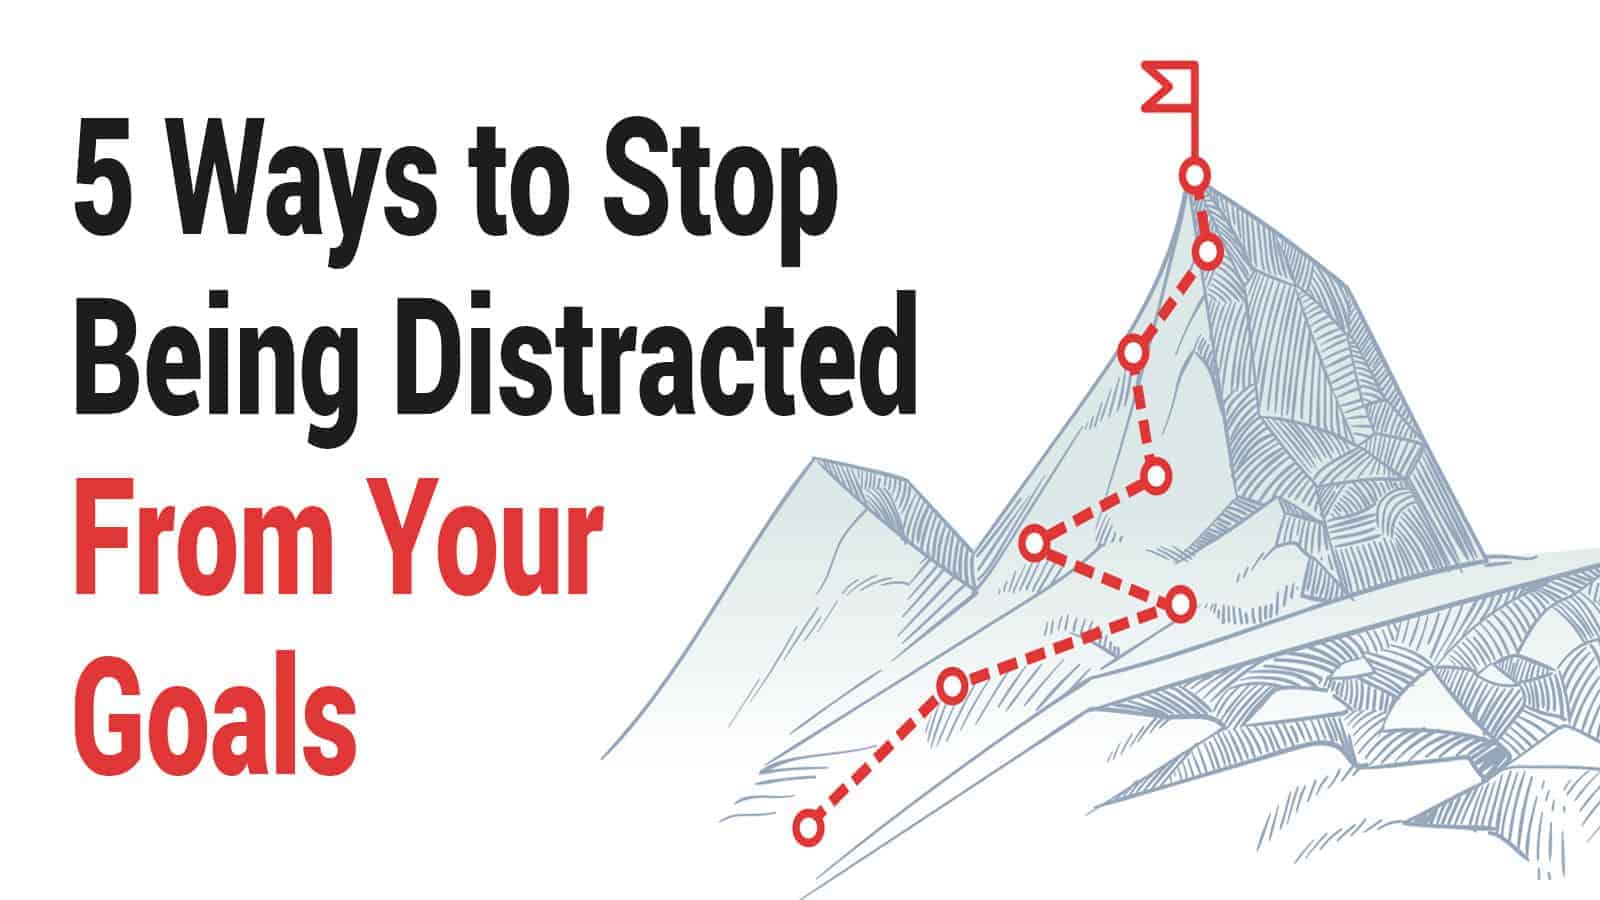 5 Ways to Stop Being Distracted From Your Goals